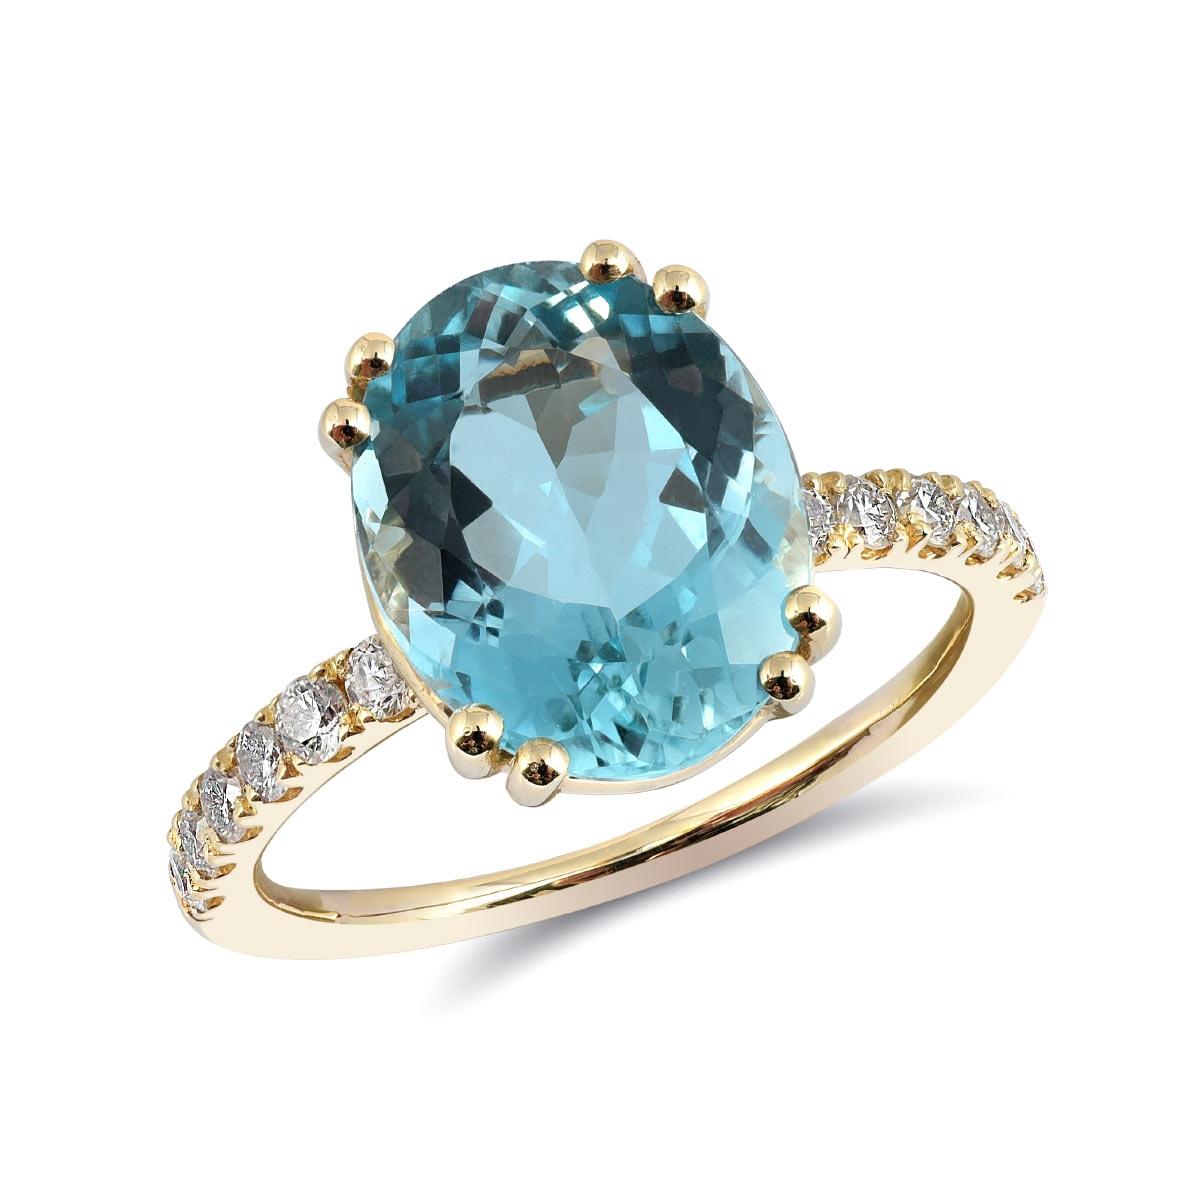 This delicately handcrafted ring features a 3.21 carat aquamarine set in a 14K yellow gold setting. The aquamarine, with its soft and captivating color, comes to life in this elegant design. The gem is centrally set and is flanked by diamonds,